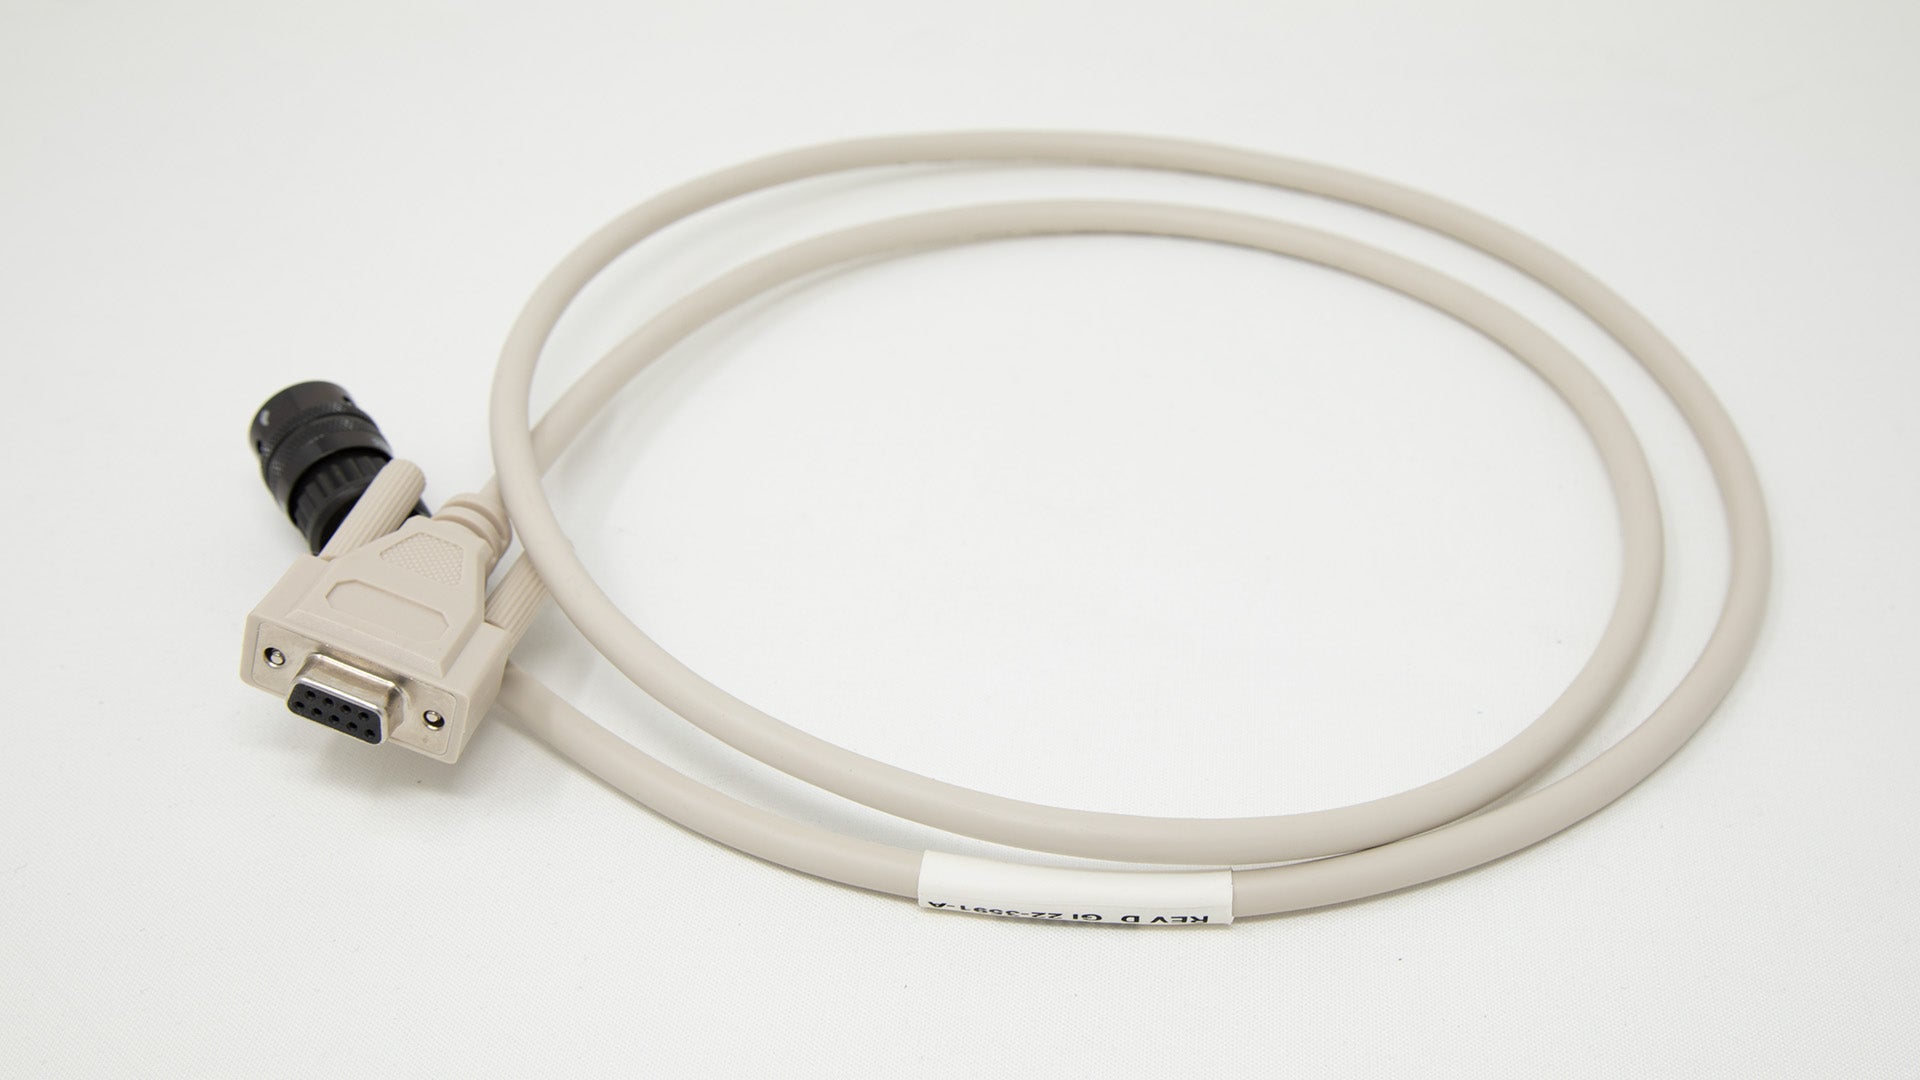 Cable with computer connector at one end and military style connector on other.